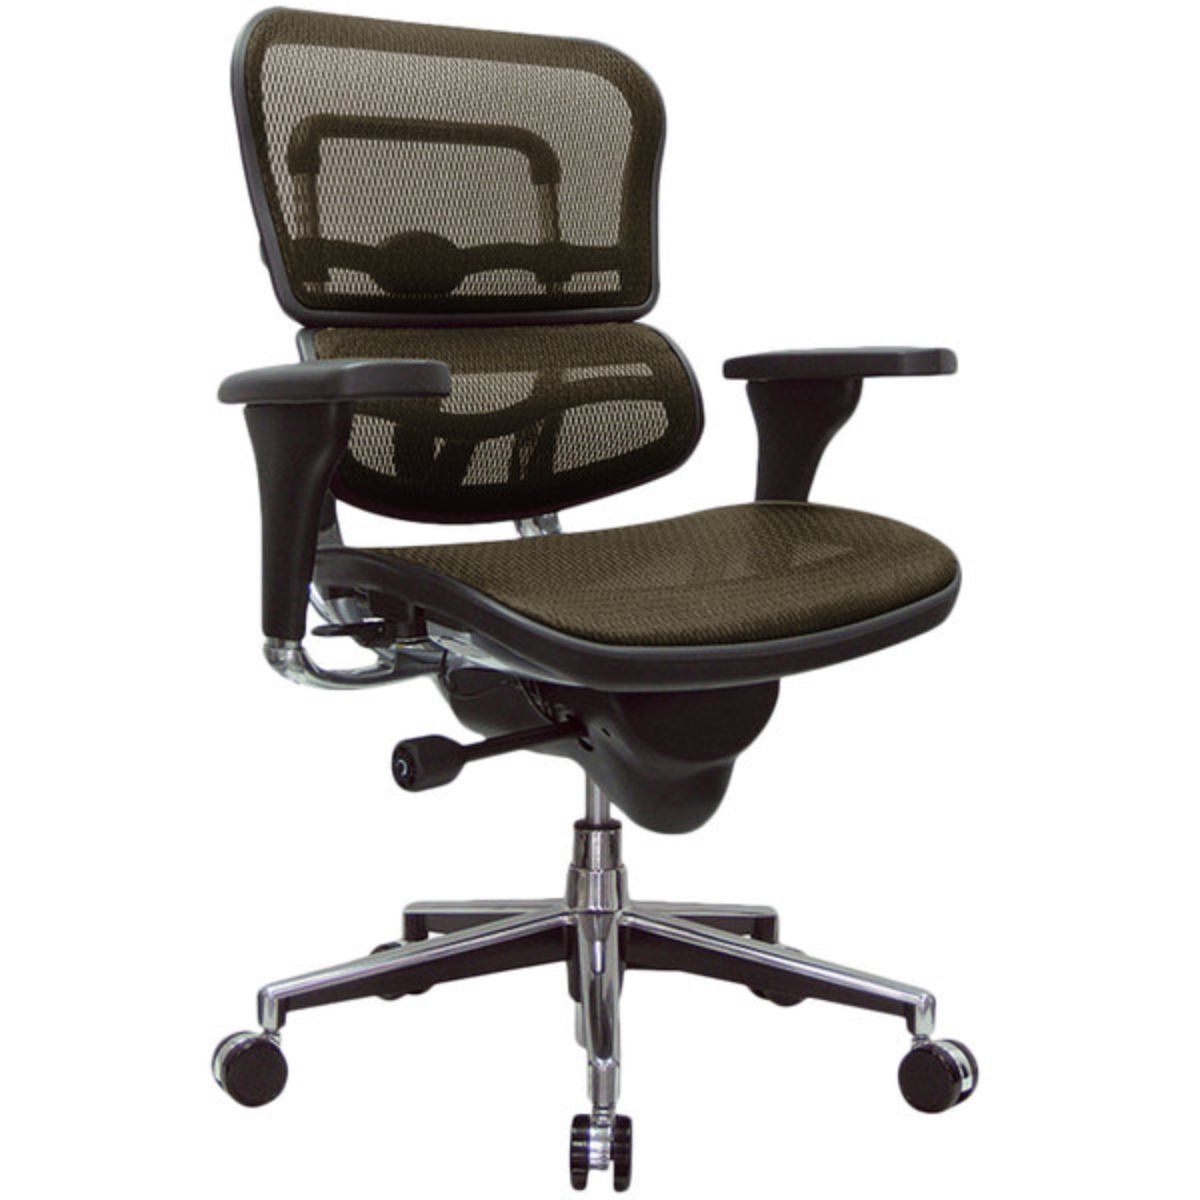 Plum and Silver Adjustable Swivel Mesh Rolling Office Chair